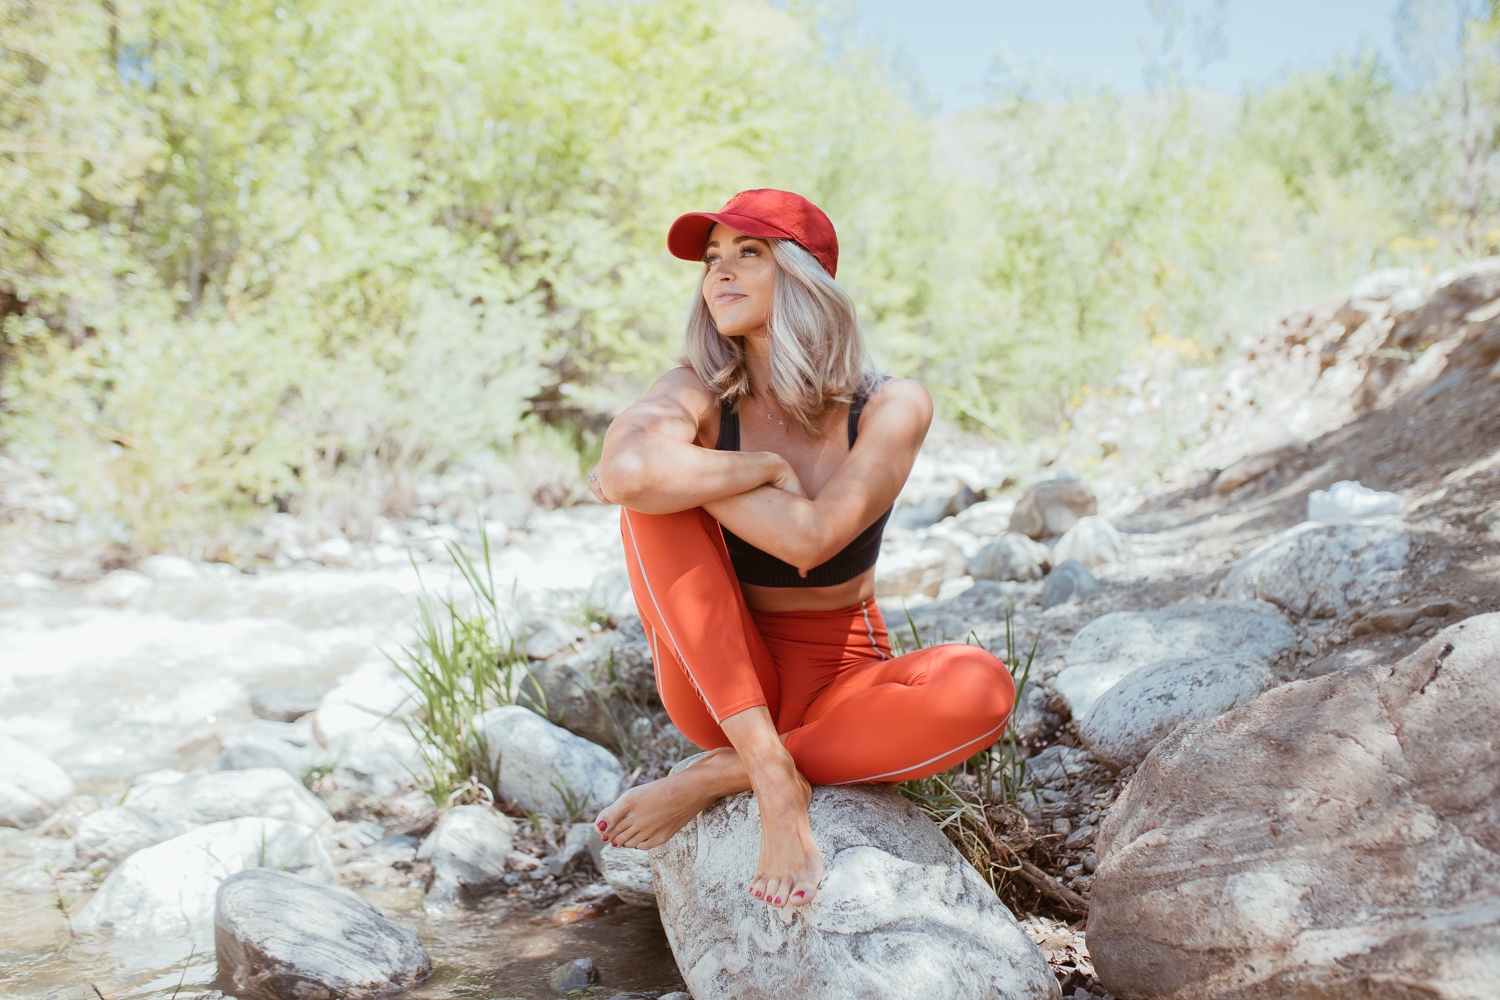 Outdoor Love with Free People - Cara Loren